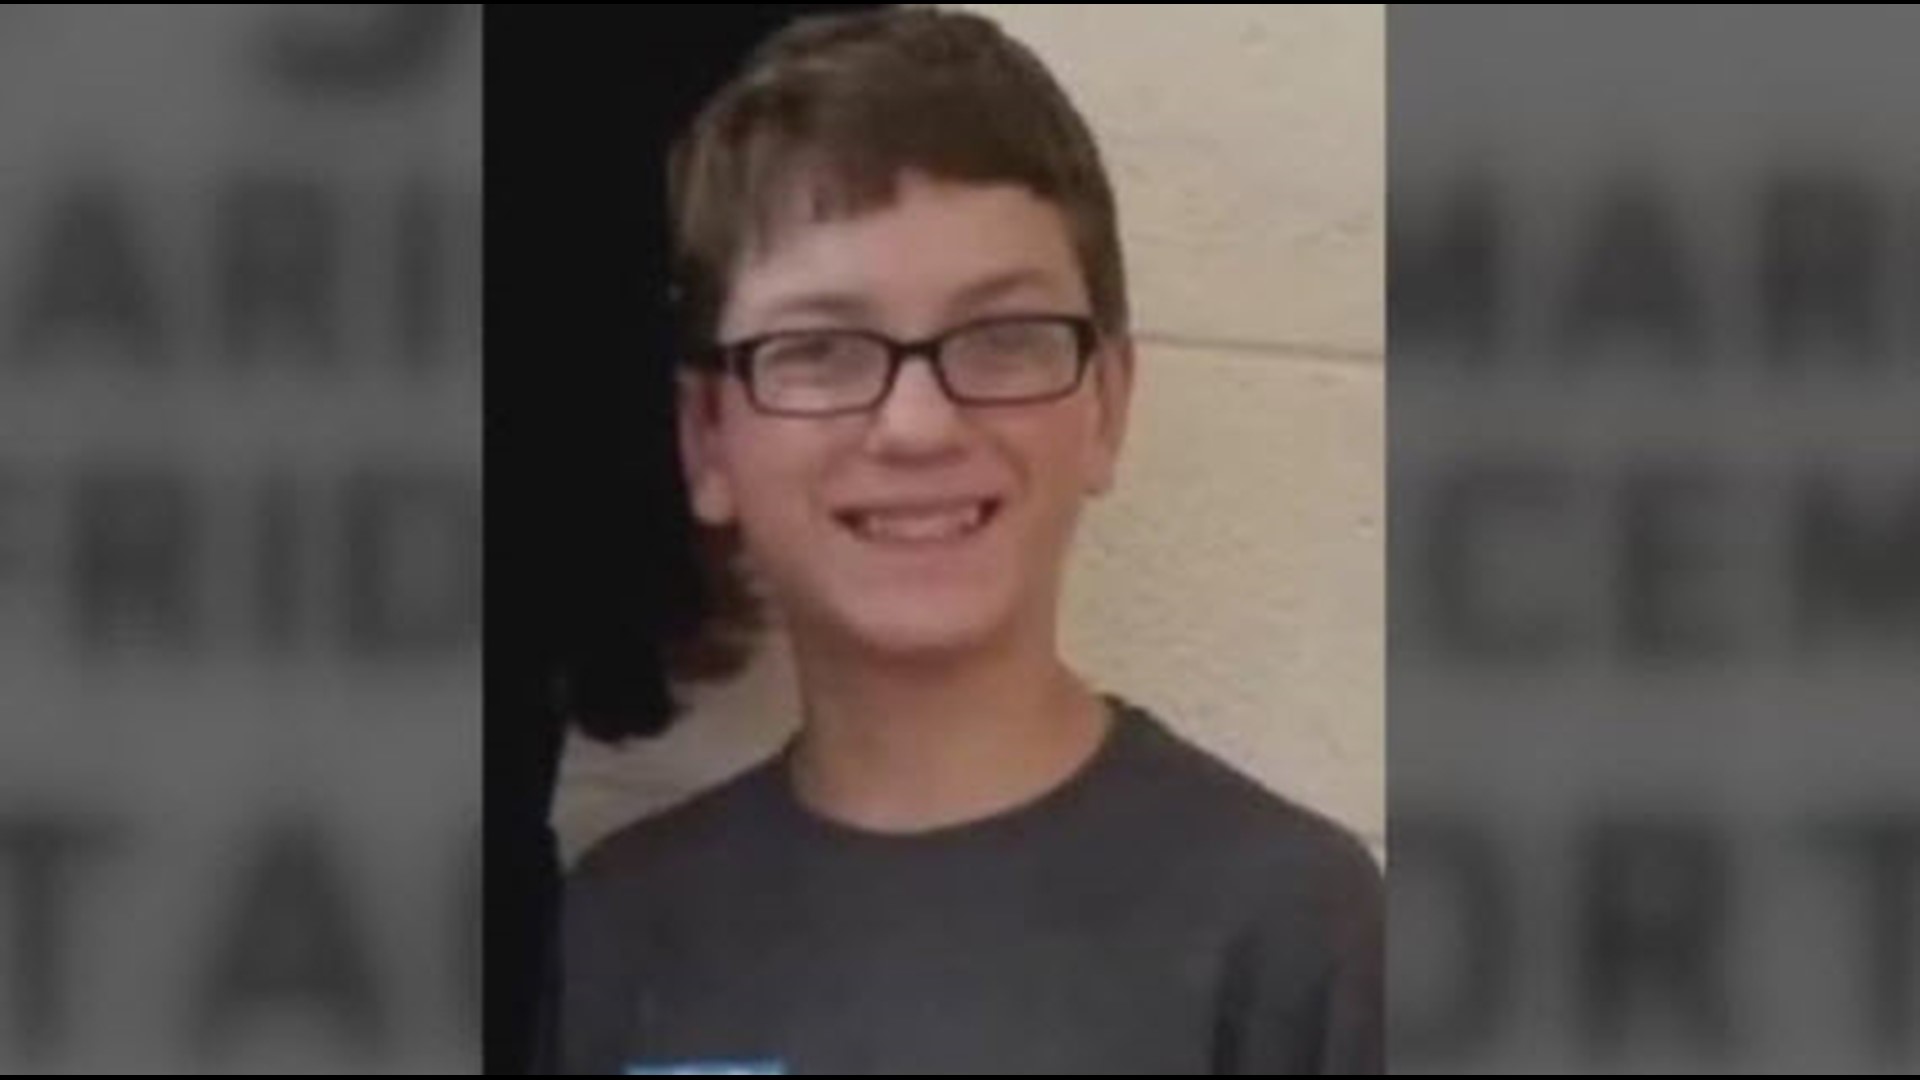 The 14-year-old's body was found inside the chimney of a home on Fulton Street in Port Clinton in January, after being missing for weeks.